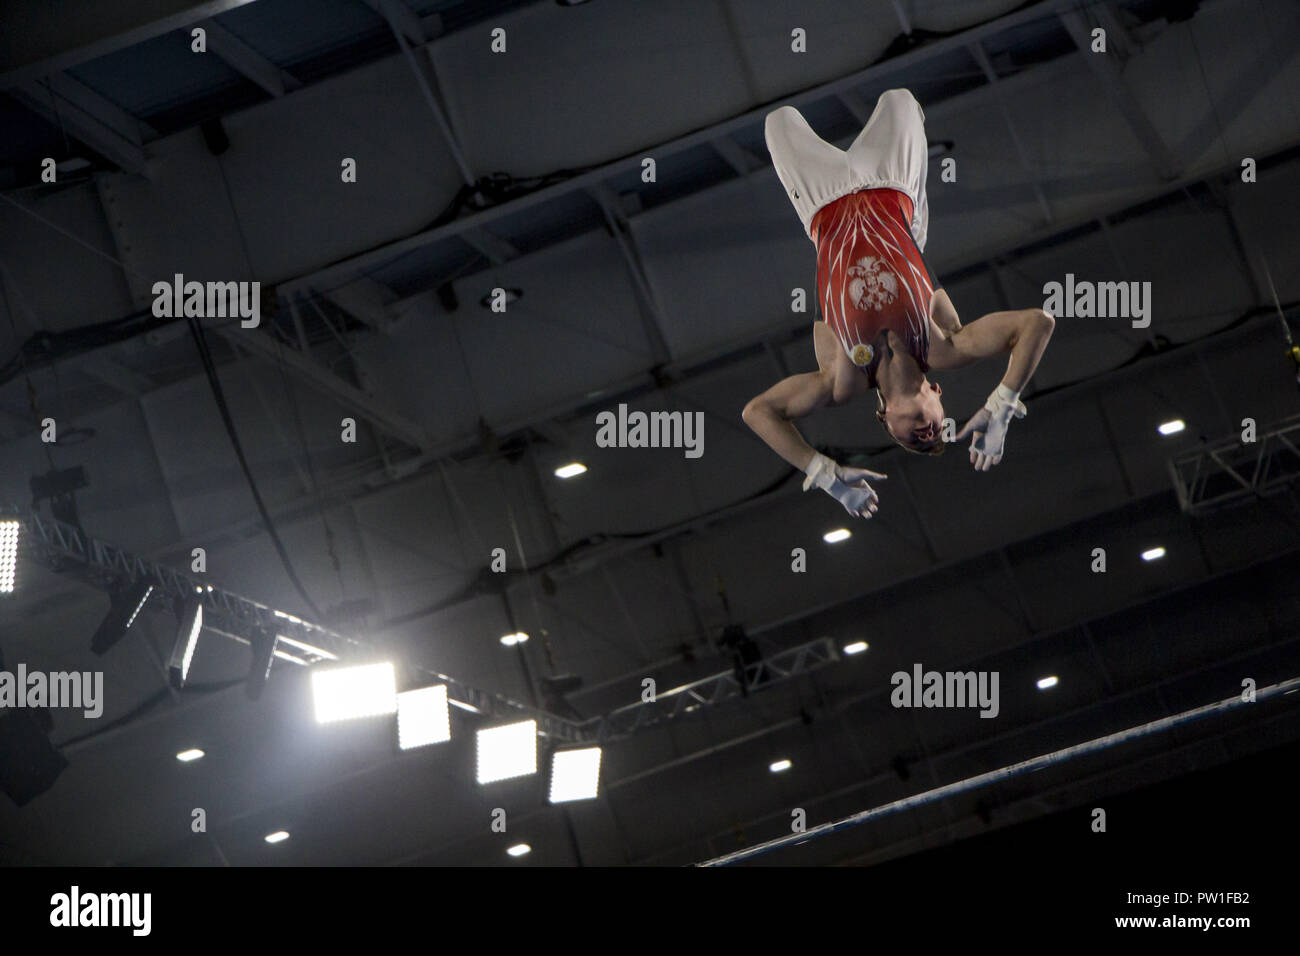 Buenos Aires, Buenos Aires, Argentina. 11th Oct, 2018. The Russian Naidin Sergei was the winner of the Silver Medal in the Multiple Masculine Artistic Gymnastics Competition at the 2018 Buenos Aires Youth Olympic Games. Credit: Roberto Almeida Aveledo/ZUMA Wire/Alamy Live News Stock Photo